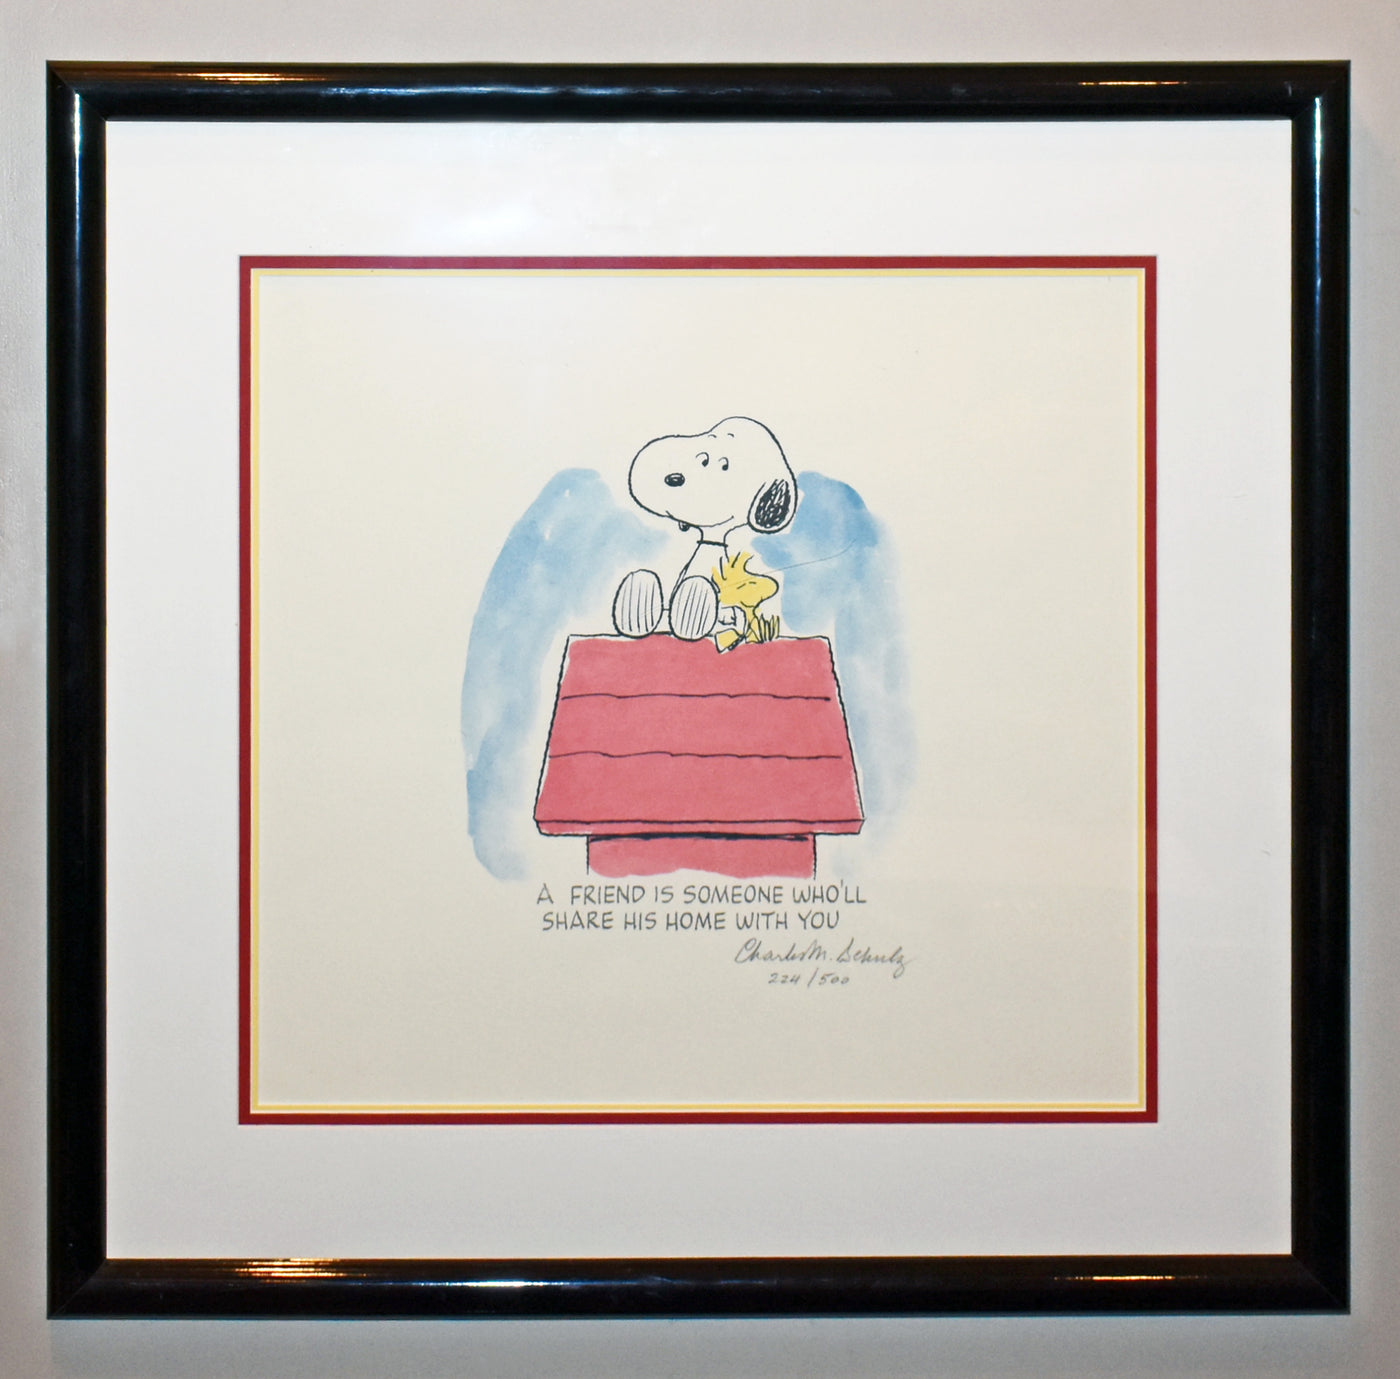 Peanuts Animation Art Limited Edition Lithograph "Sharing is..."